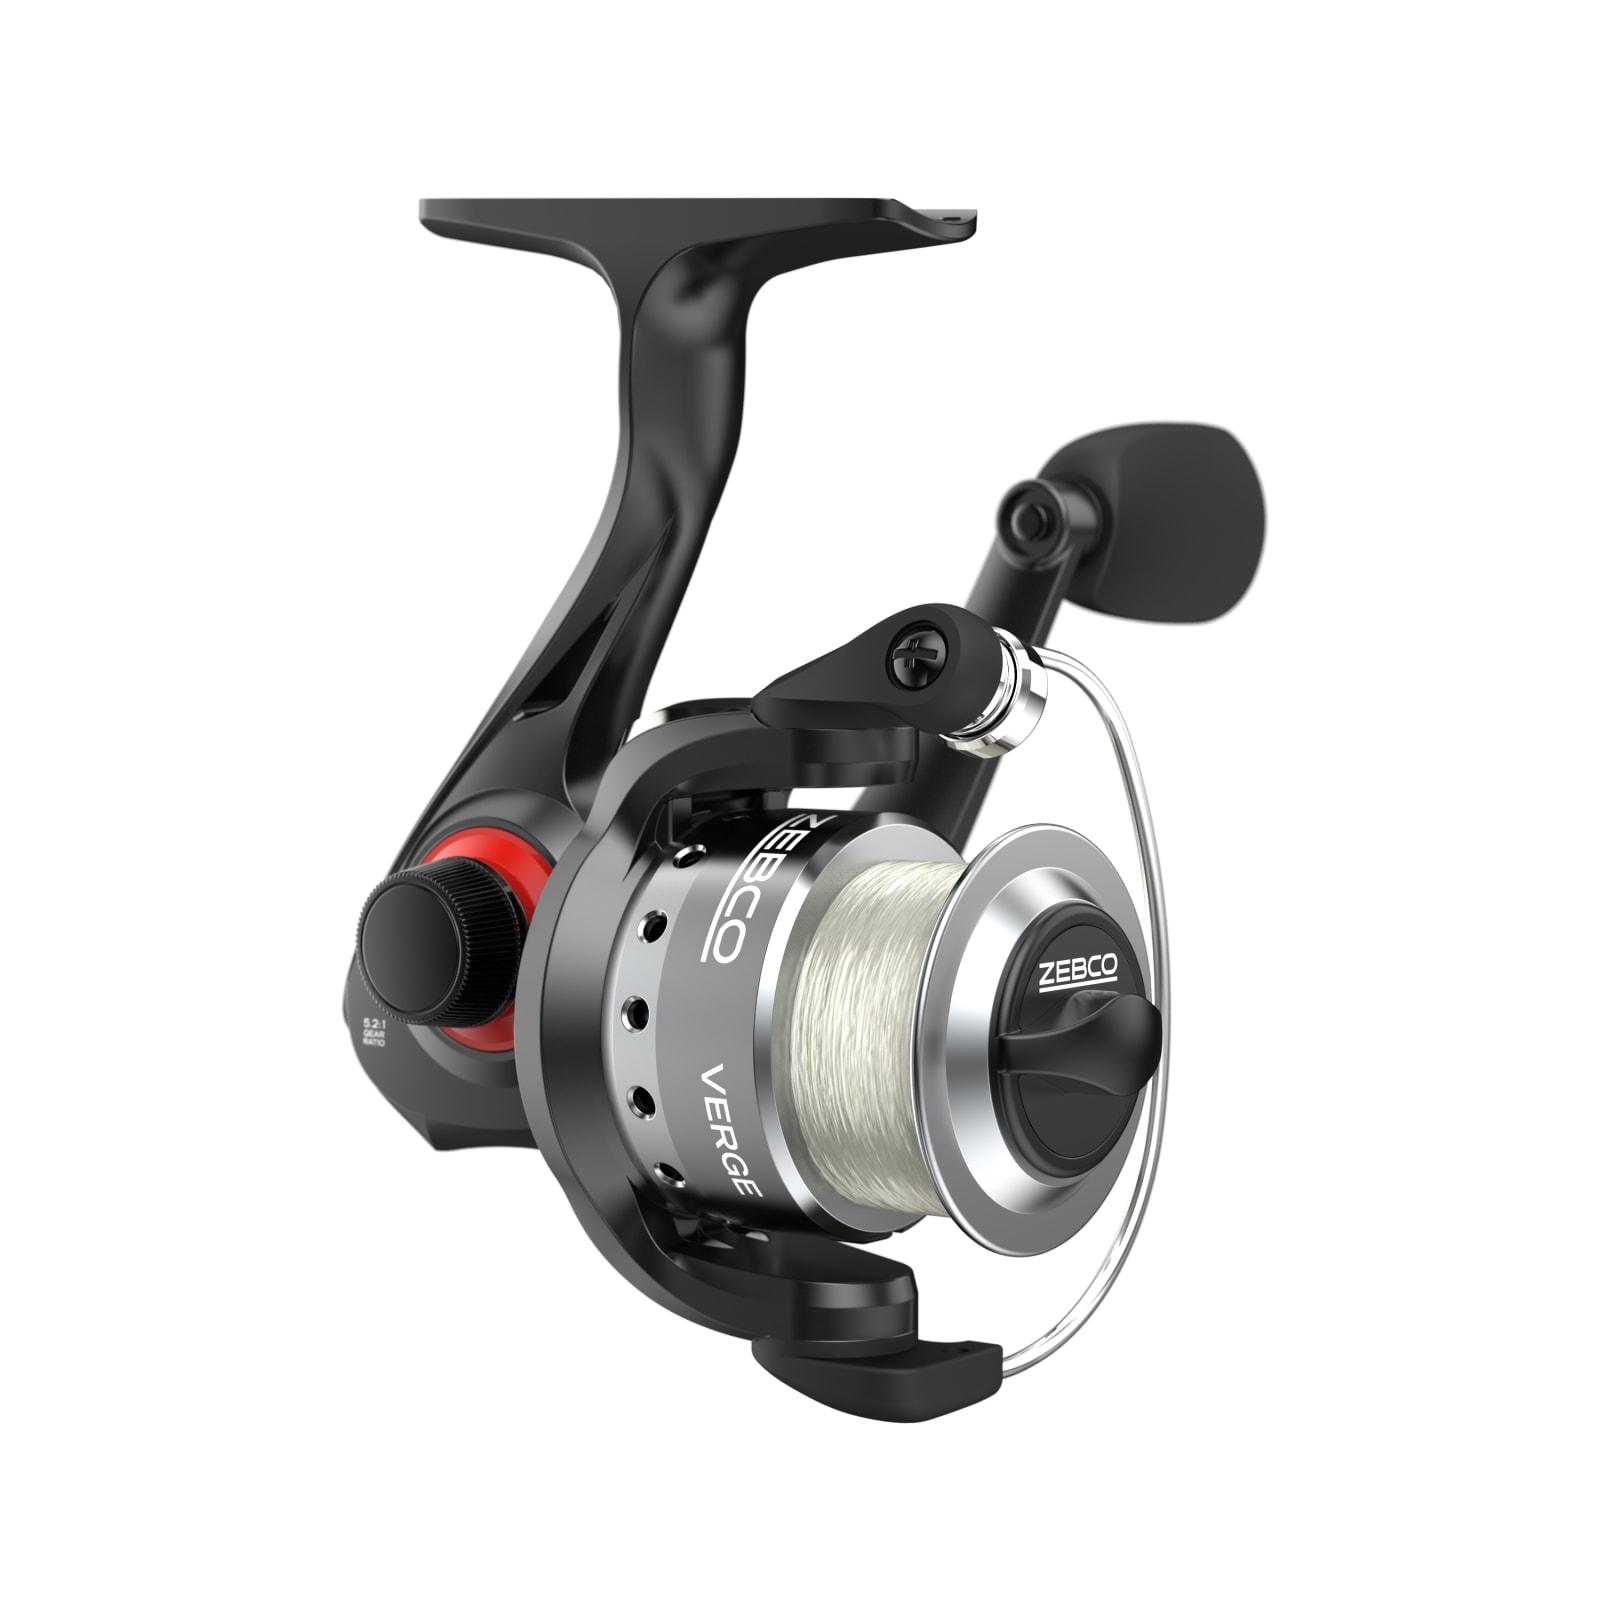 Verge Size 20 Spinning Reel by Zebco at Fleet Farm